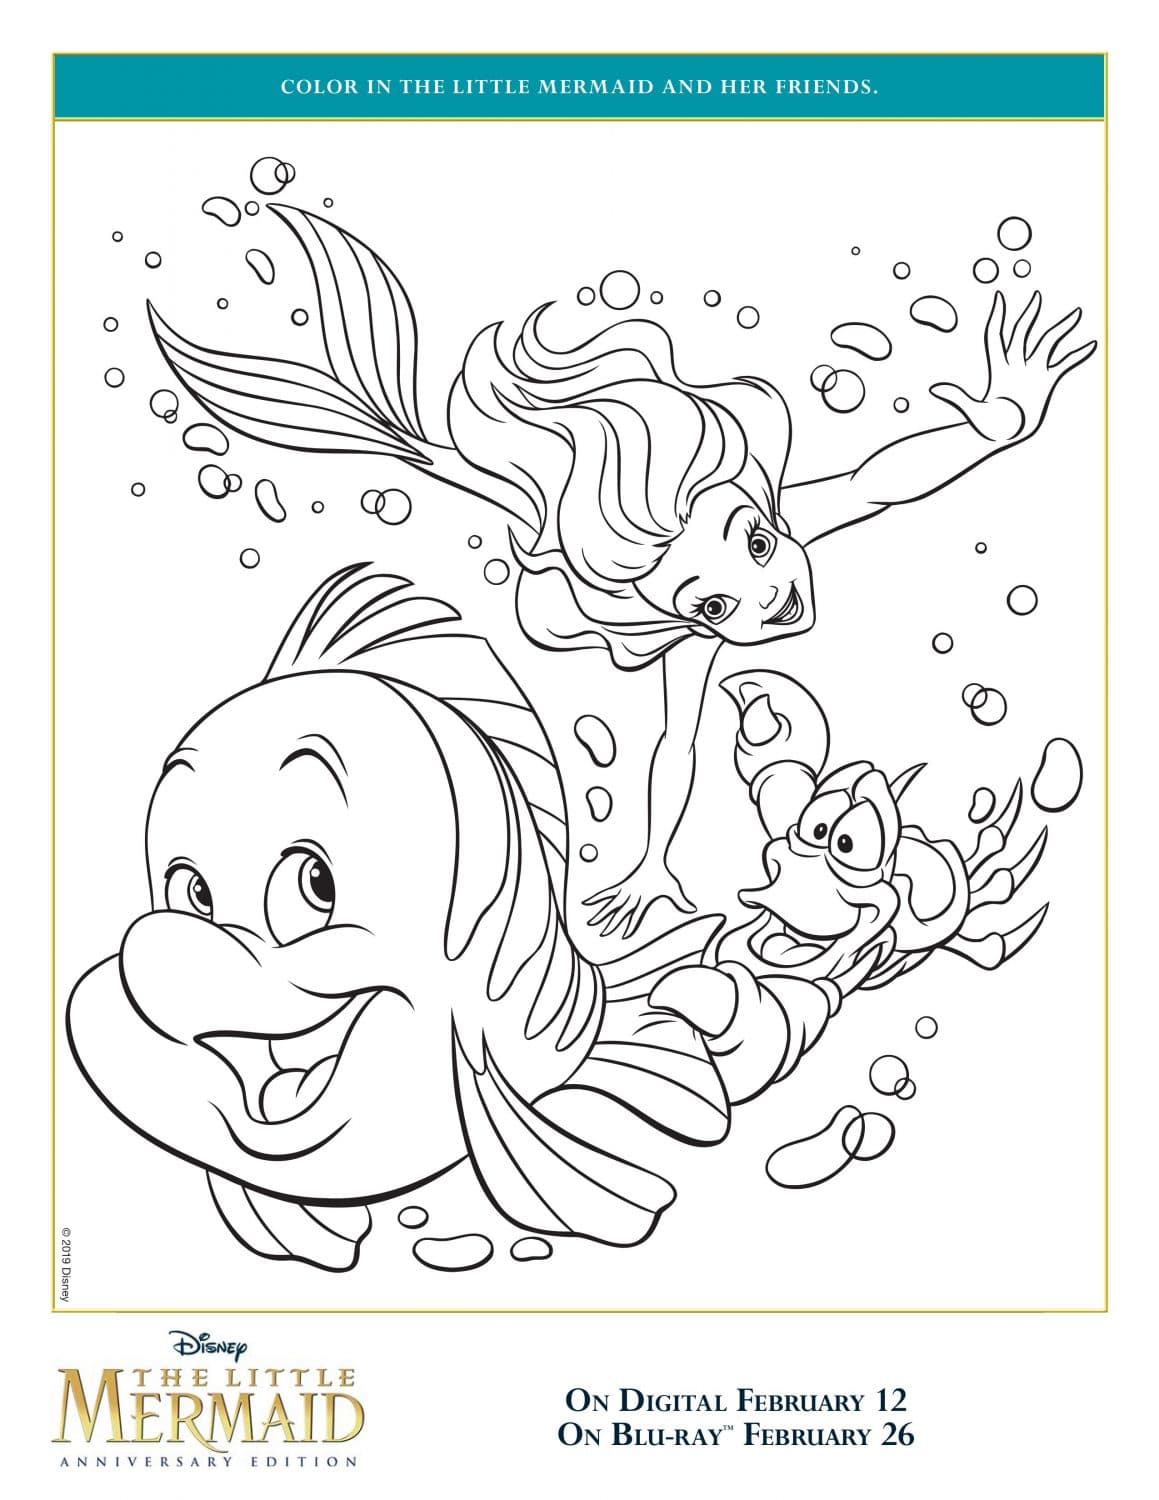 The Little Mermaid and Friends Coloring Page